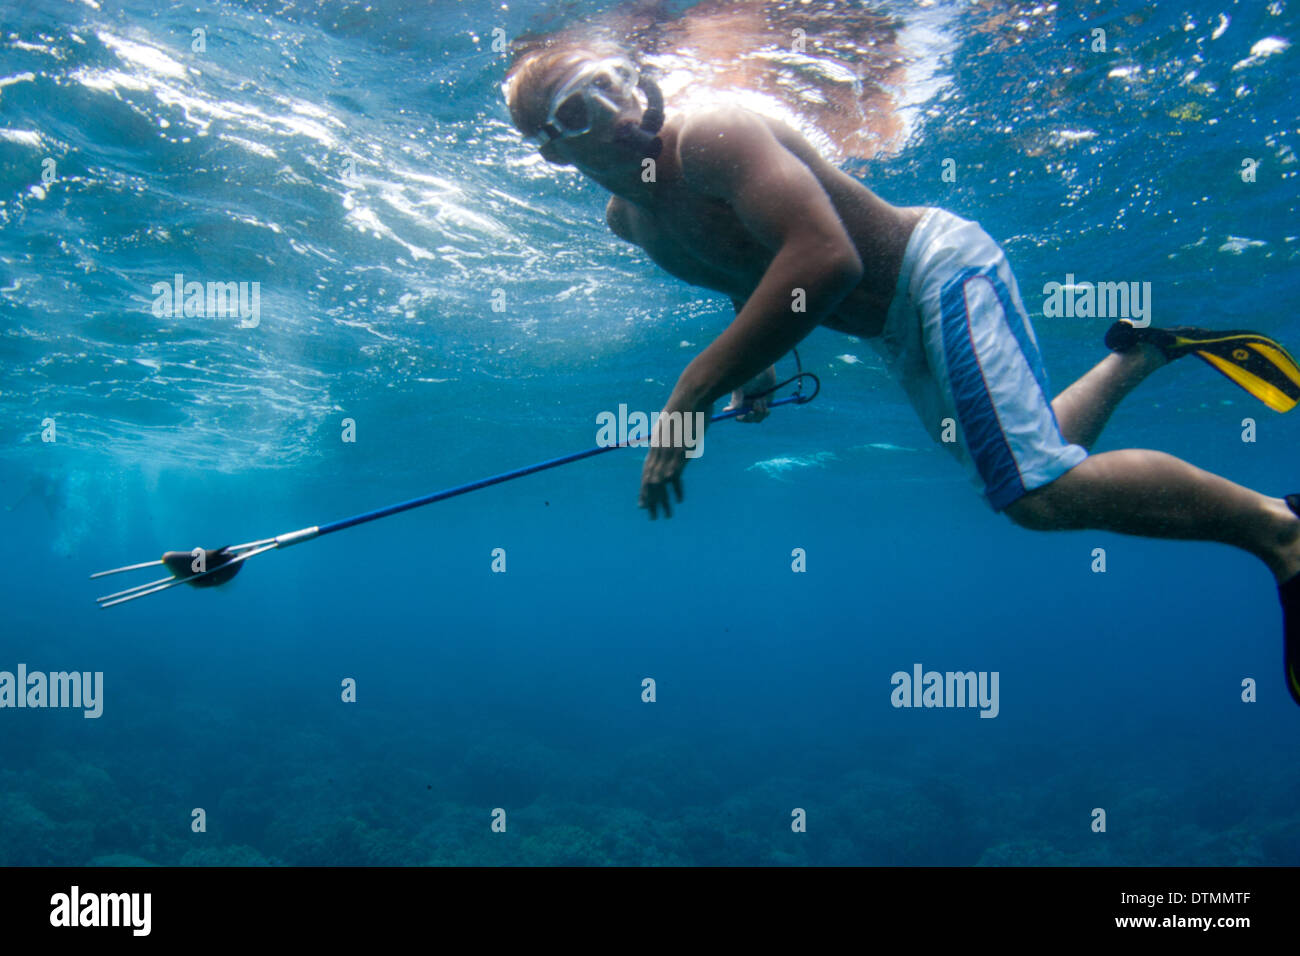 https://c8.alamy.com/comp/DTMMTF/men-underwater-spearfishing-in-hawaii-by-coral-reef-DTMMTF.jpg